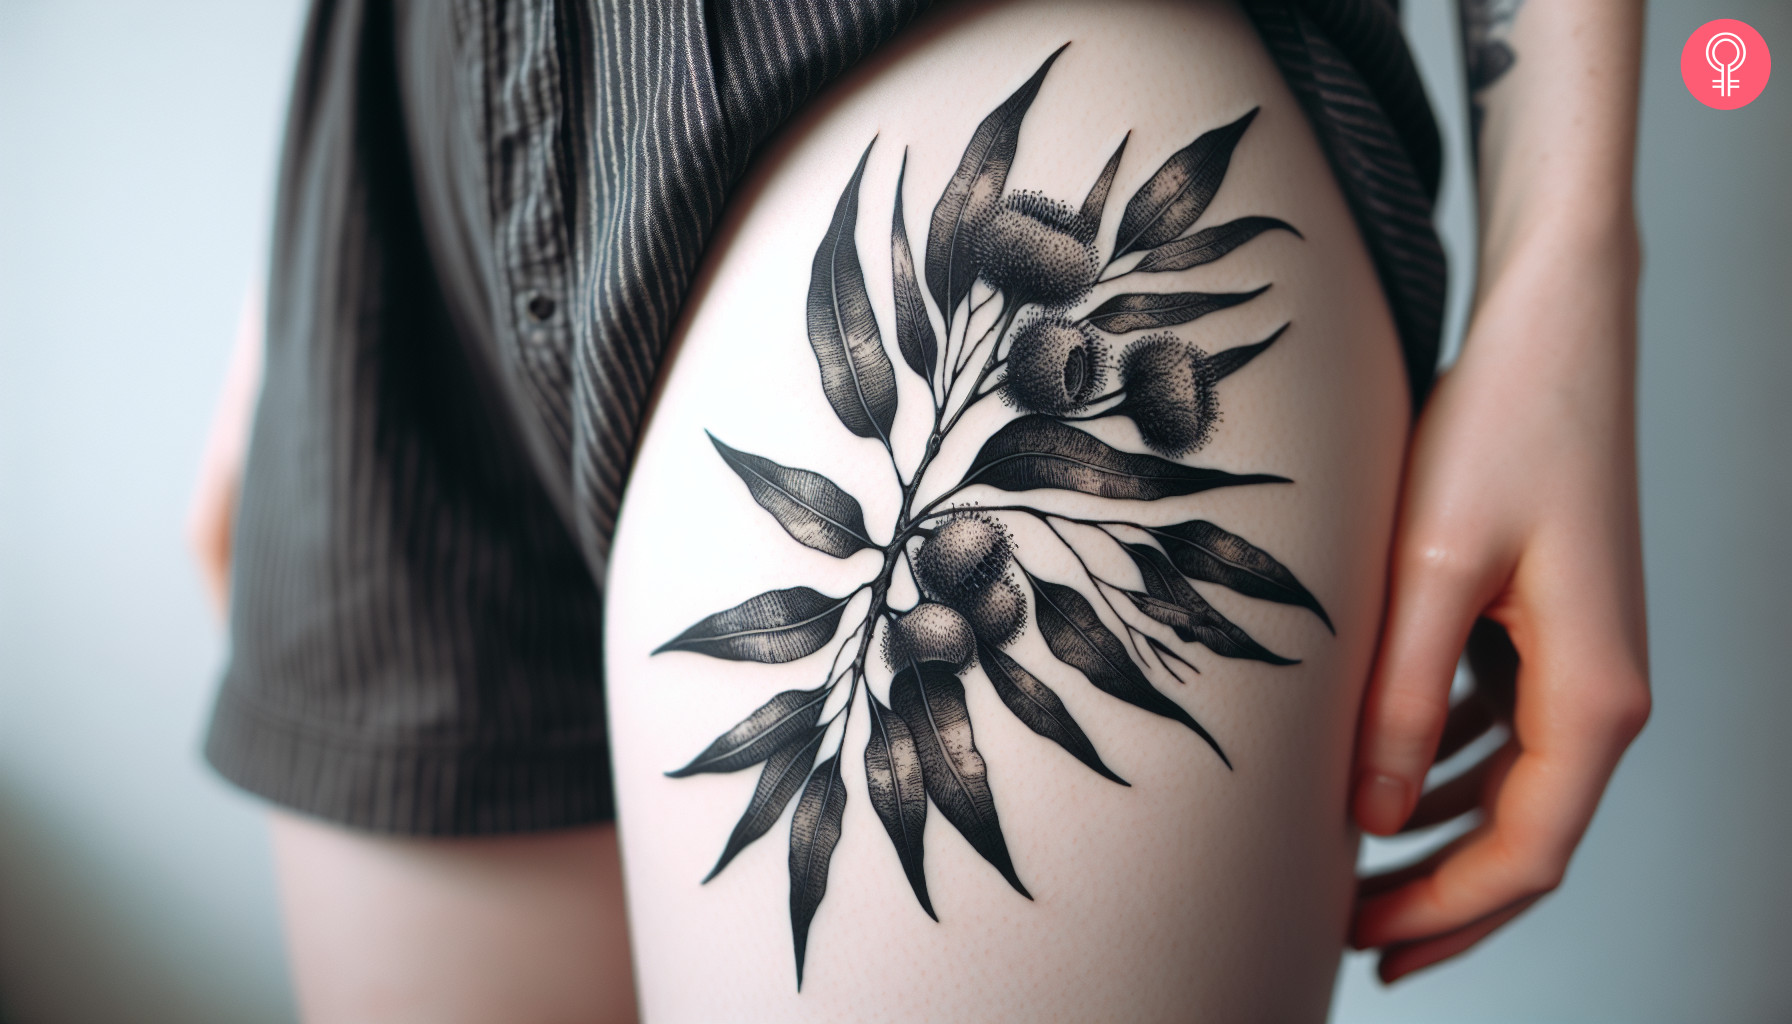 A woman wearing a black eucalyptus tattoo on her thigh